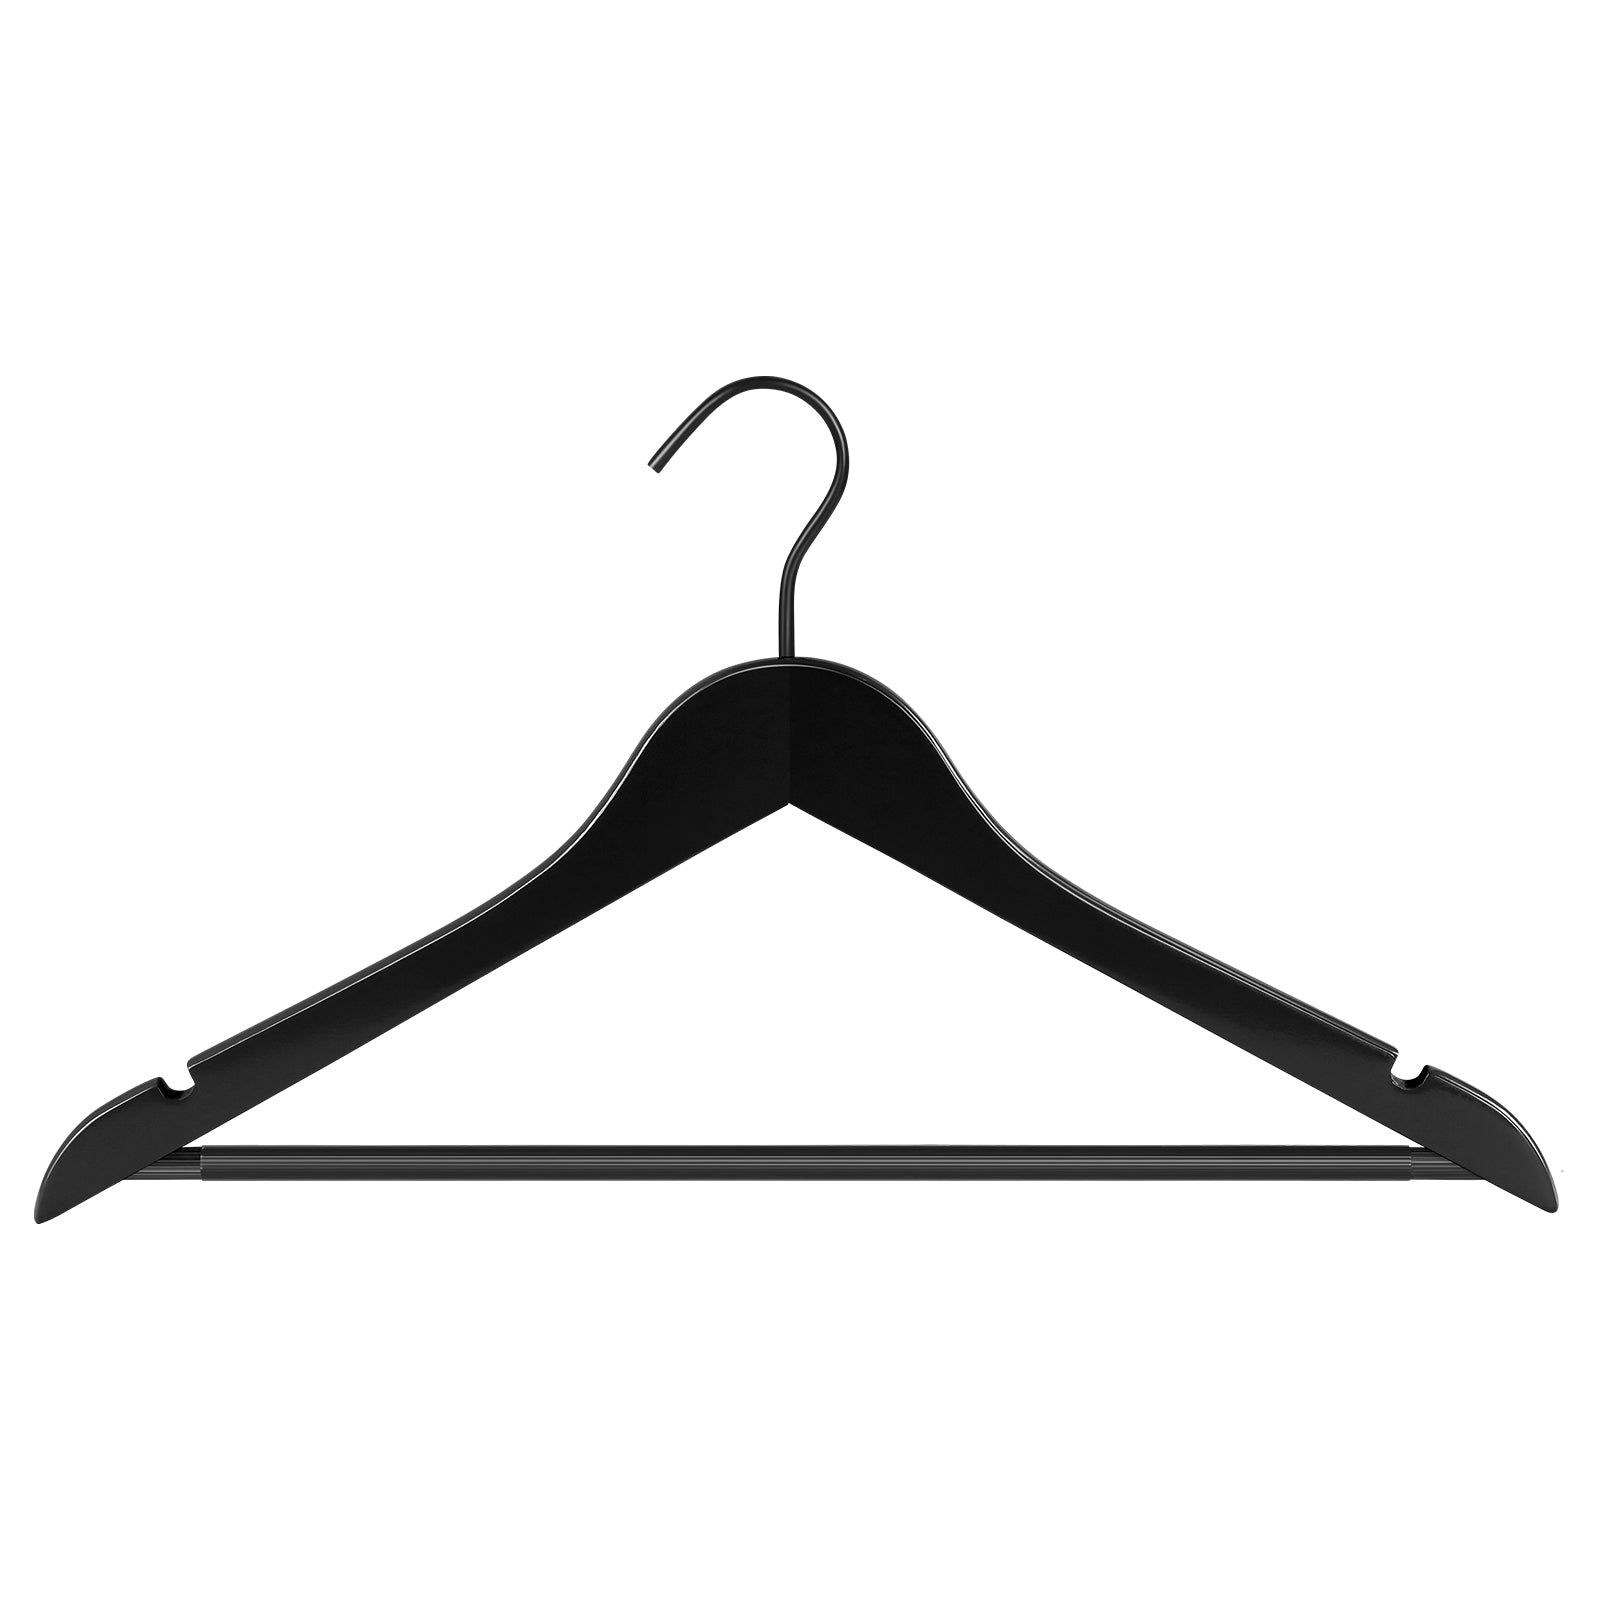 Perfecasa Premium Wooden Clothes Hangers 20 Pack, Wood Hangers with Noise  Canceling Hook, Heavy Duty Hangers, Coat Hangers, Shirt Hangers, with Non